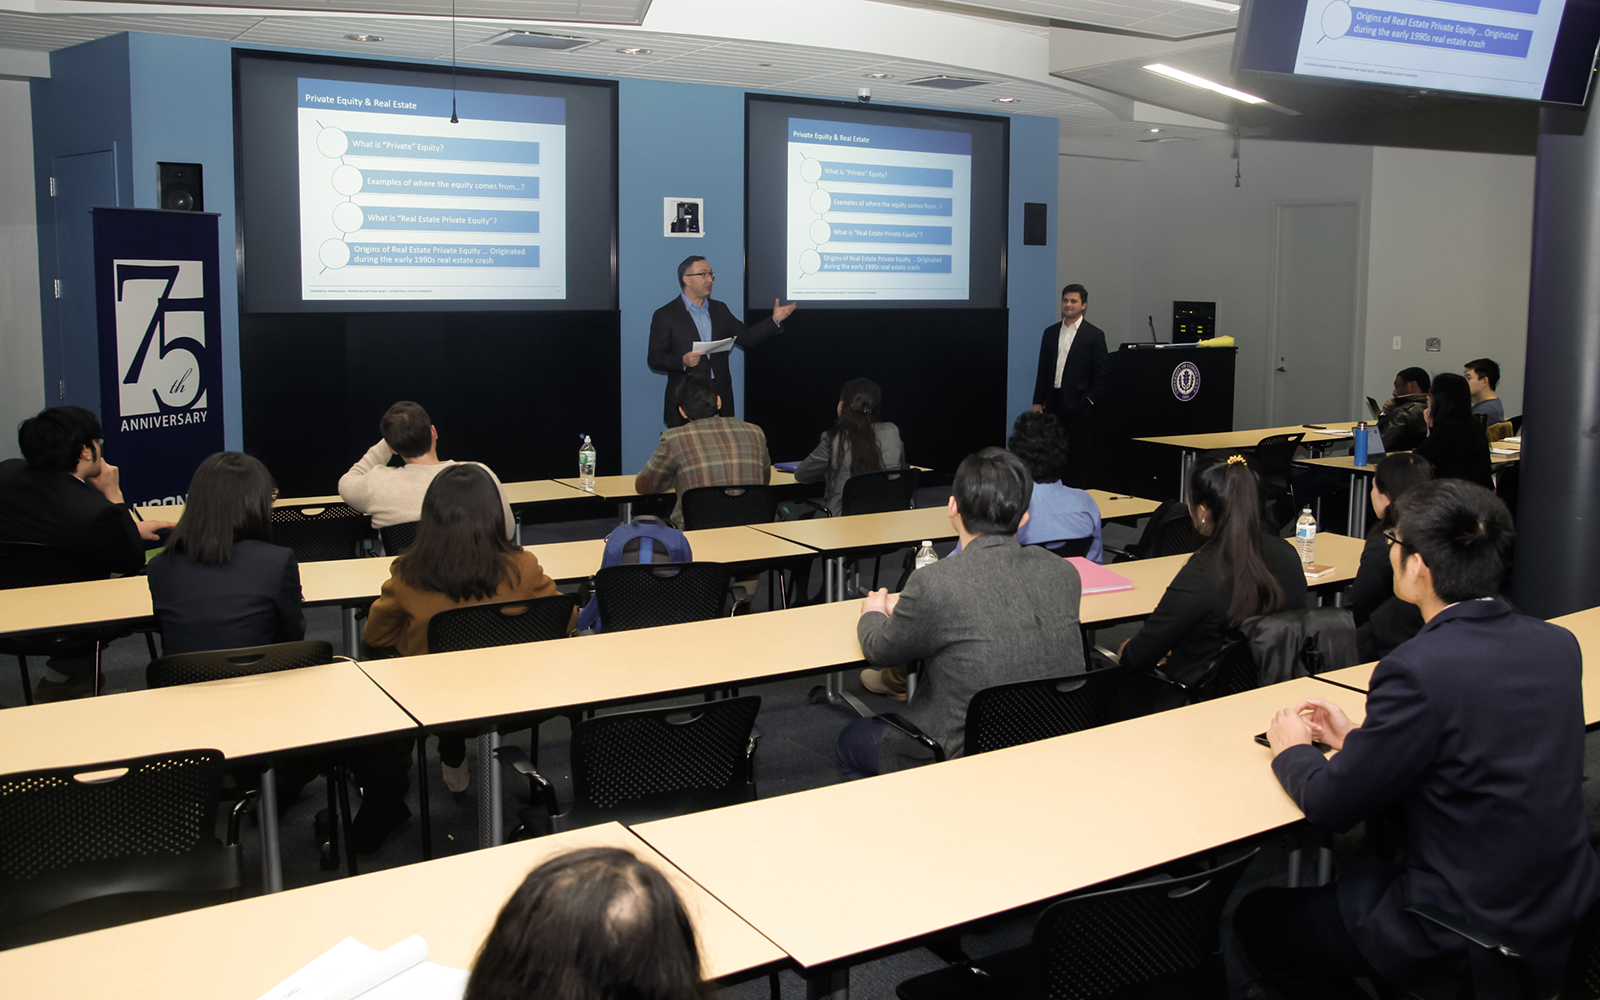 John McCarthy '83, managing director, Global Capital Raising, and Chintan Bhat '07 (ENG), vice president of portfolio management, shared their career experiences at Starwood Capital Group to the Finance Club at the Stamford campus on February 25th. (Ian Hollis/UConn photo)